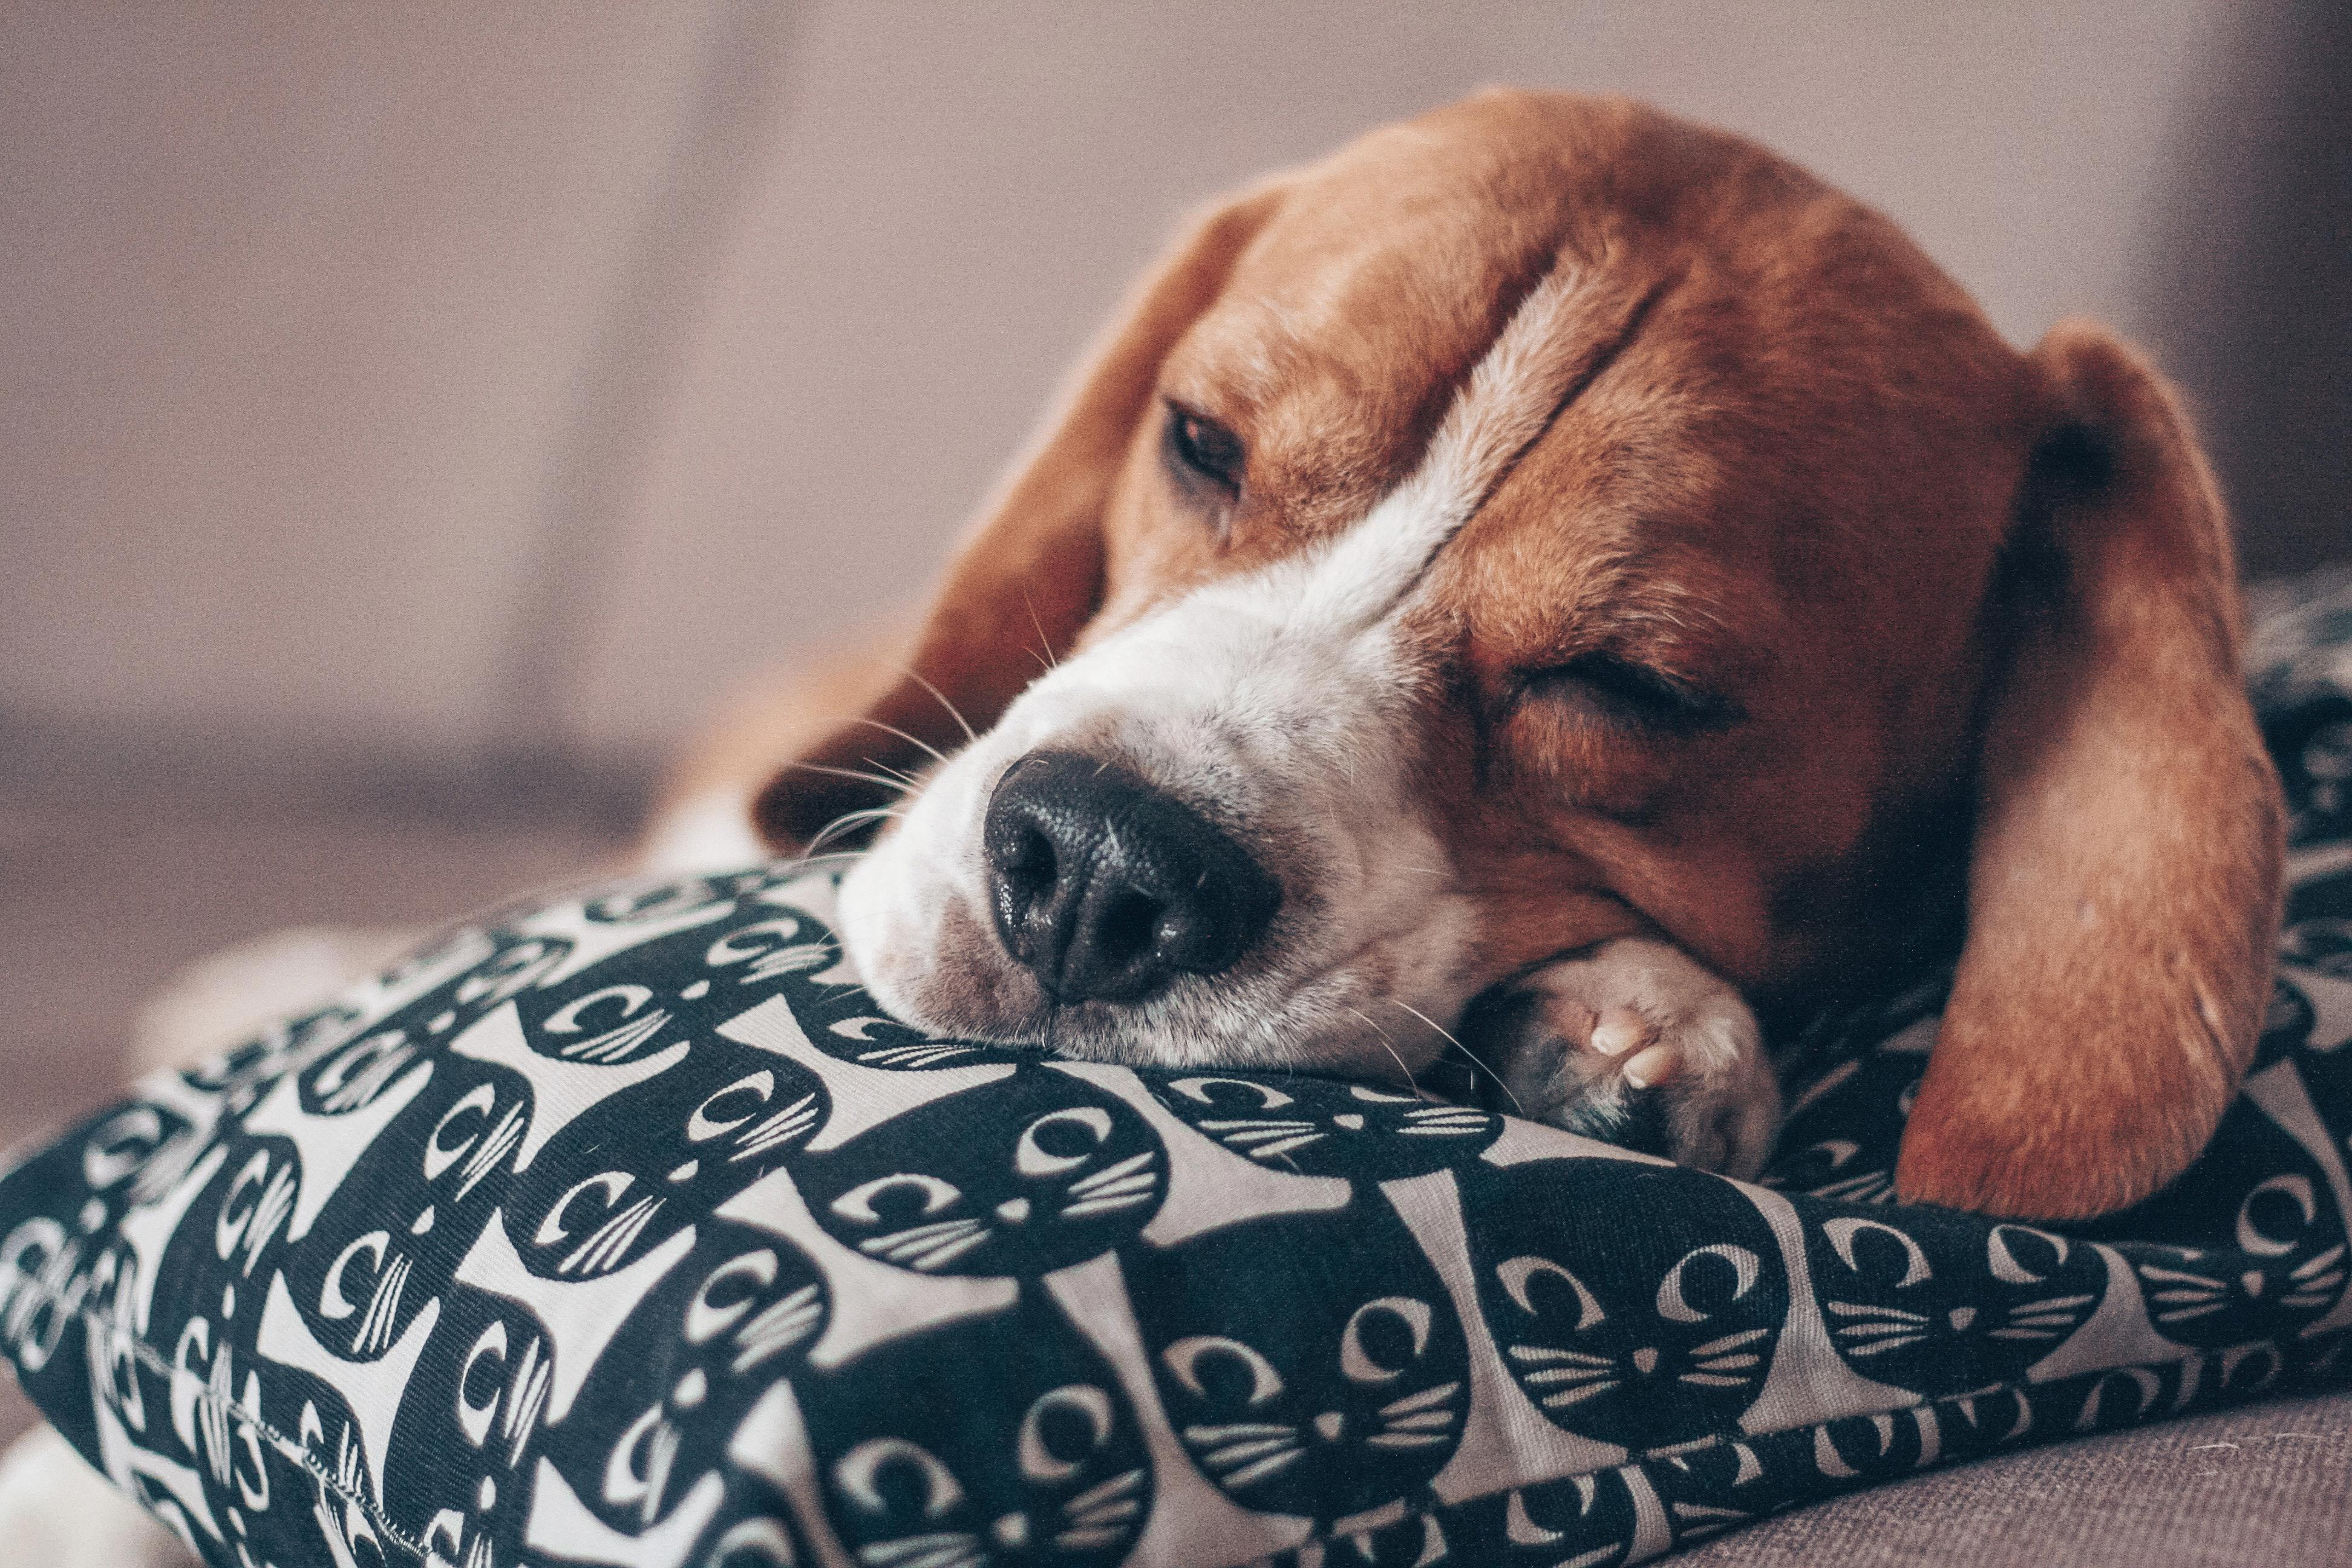 The Friendly Beagle: Are These Dogs Good With Other Dogs?